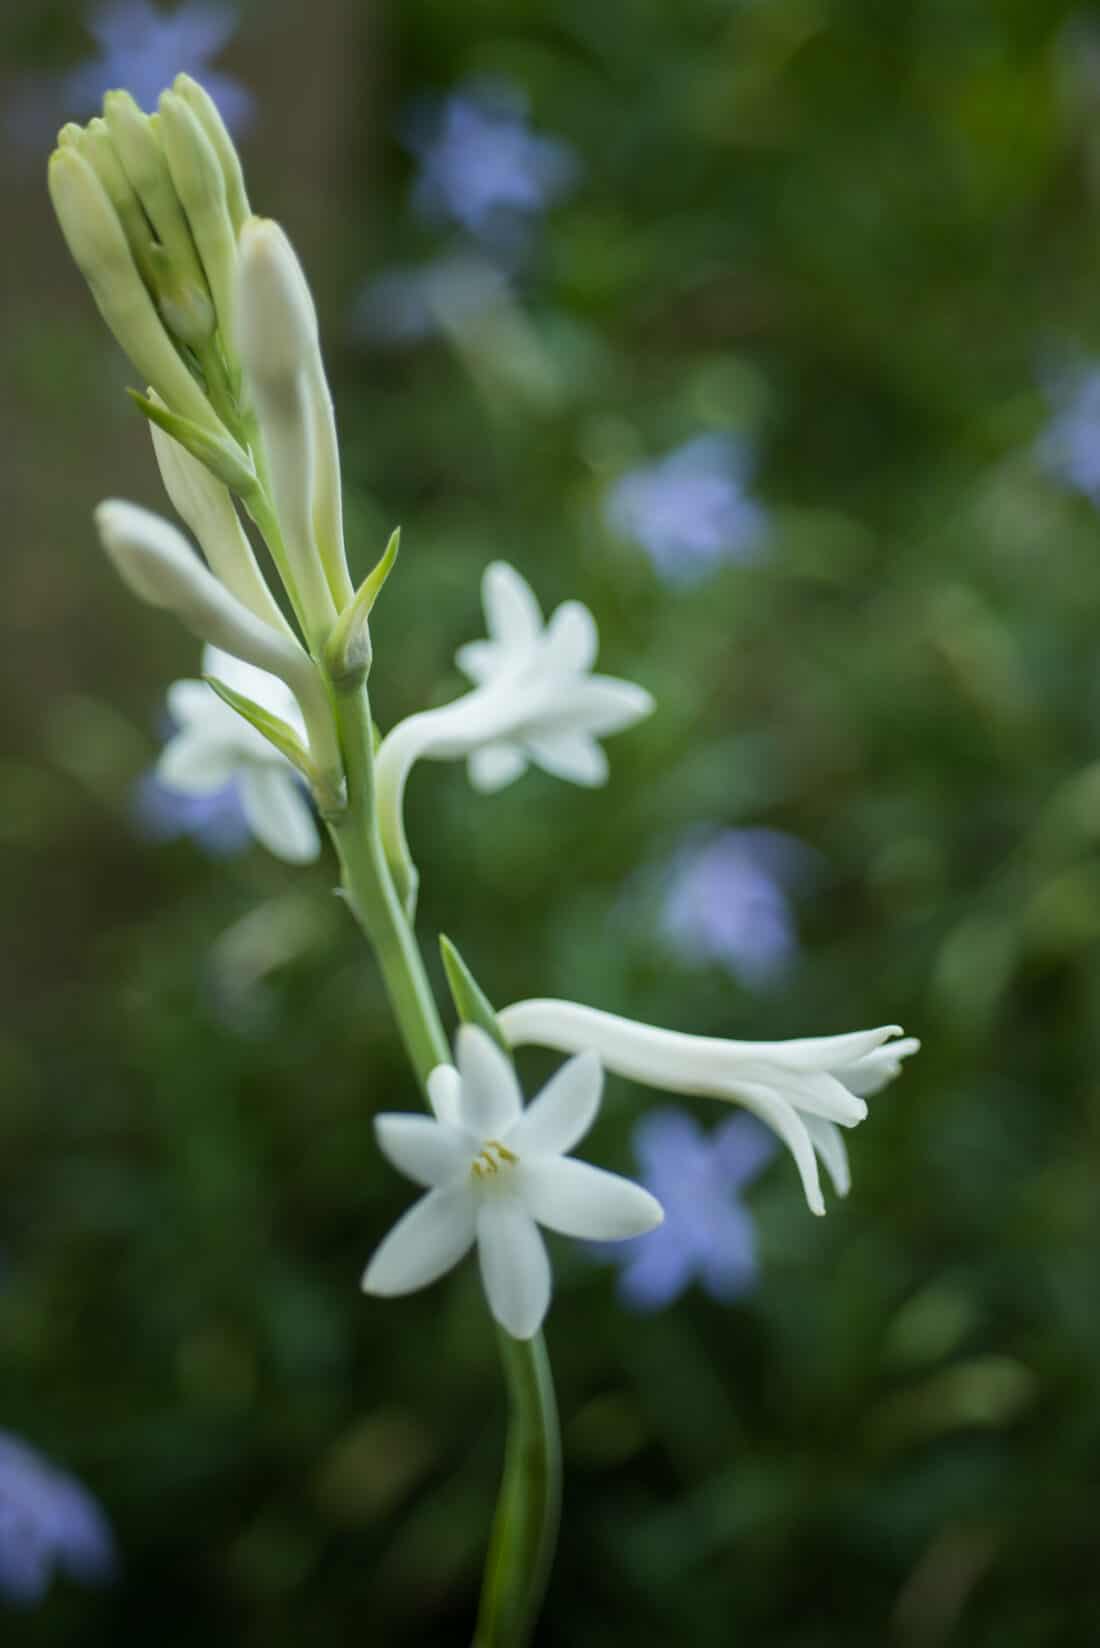 Close-up of a tuberose (polianthes tuberosa) with several open white blooms and unopened buds against a soft-focus background of green foliage and blue flowers.